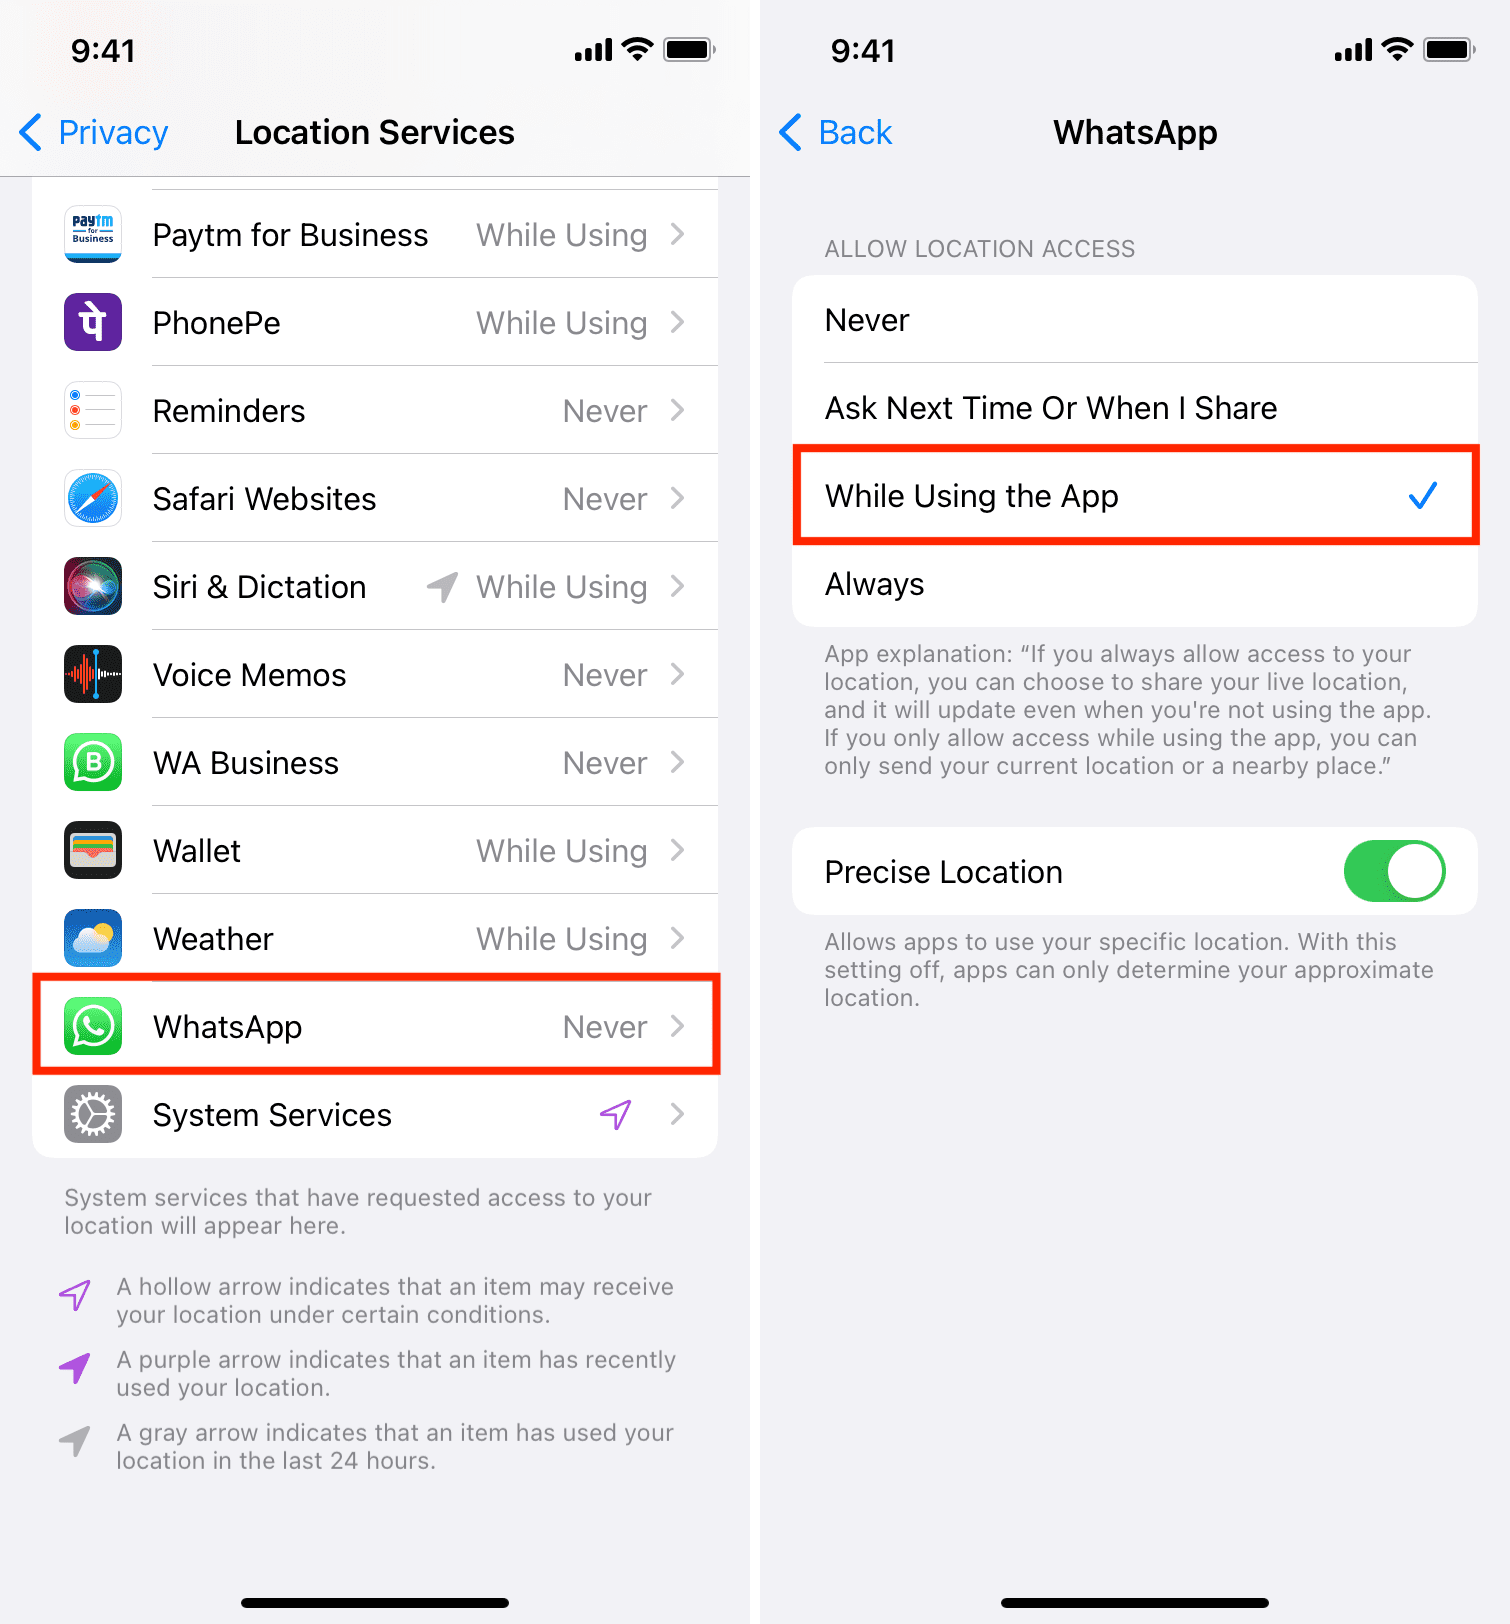 While Using the App in Location Services for an app on iPhone